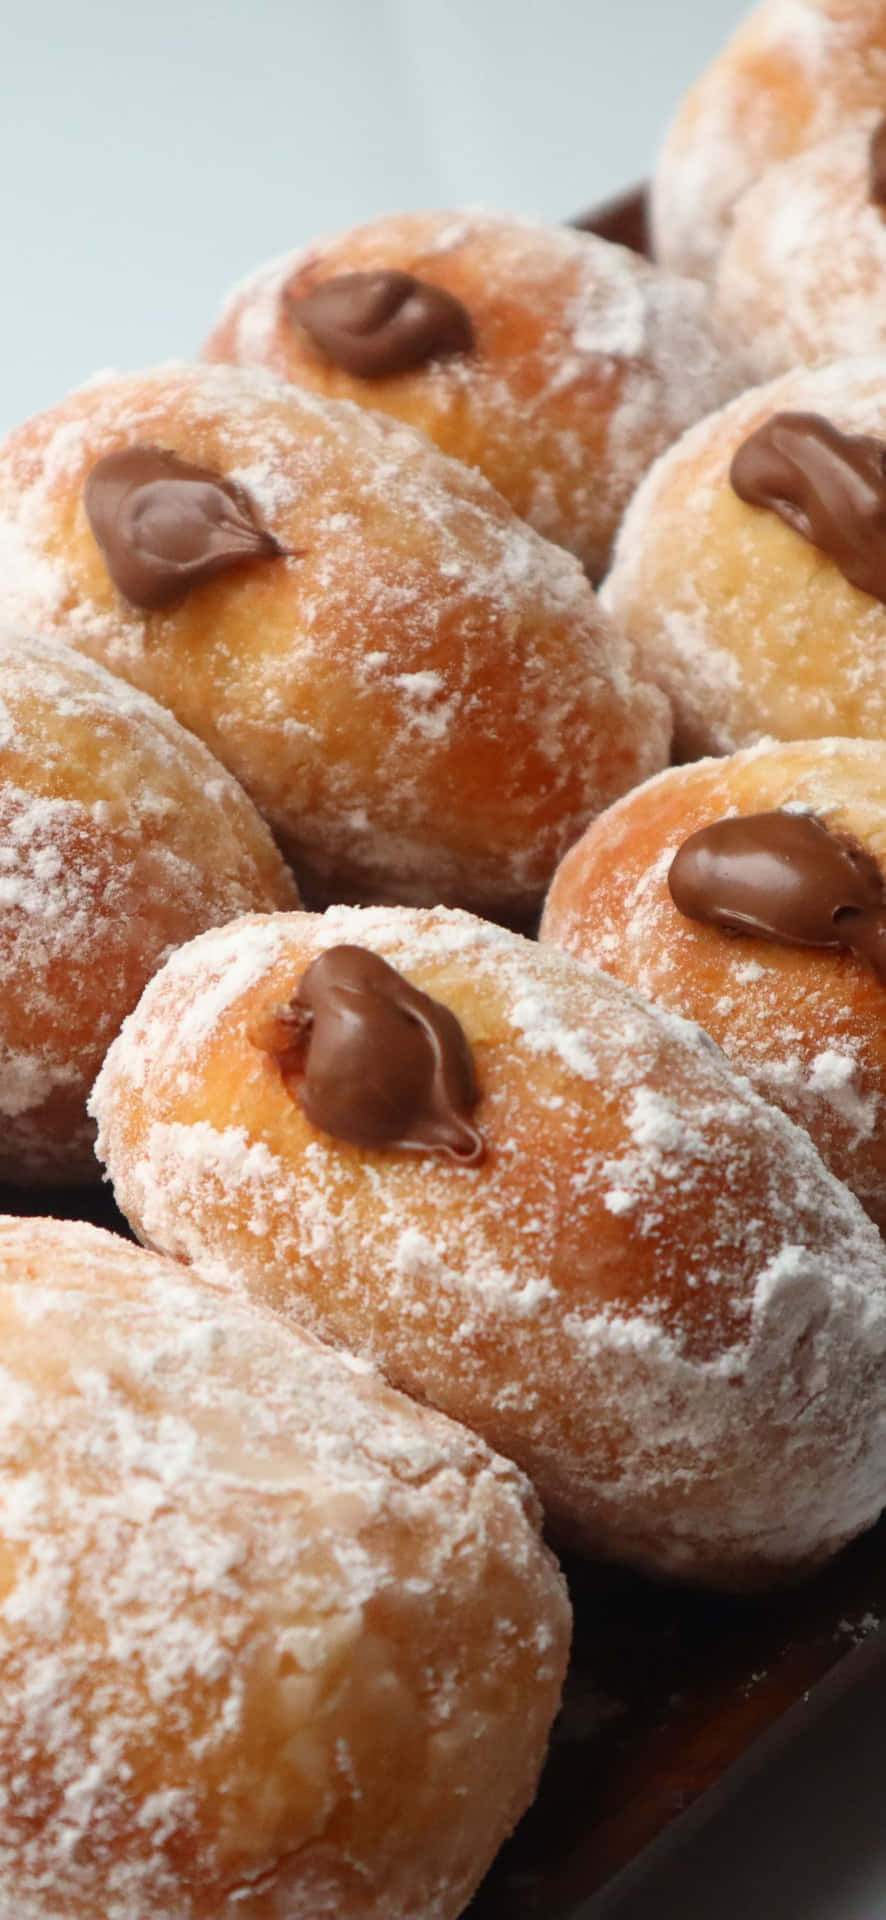 A Plate Of Donuts With Chocolate And Powdered Sugar Wallpaper